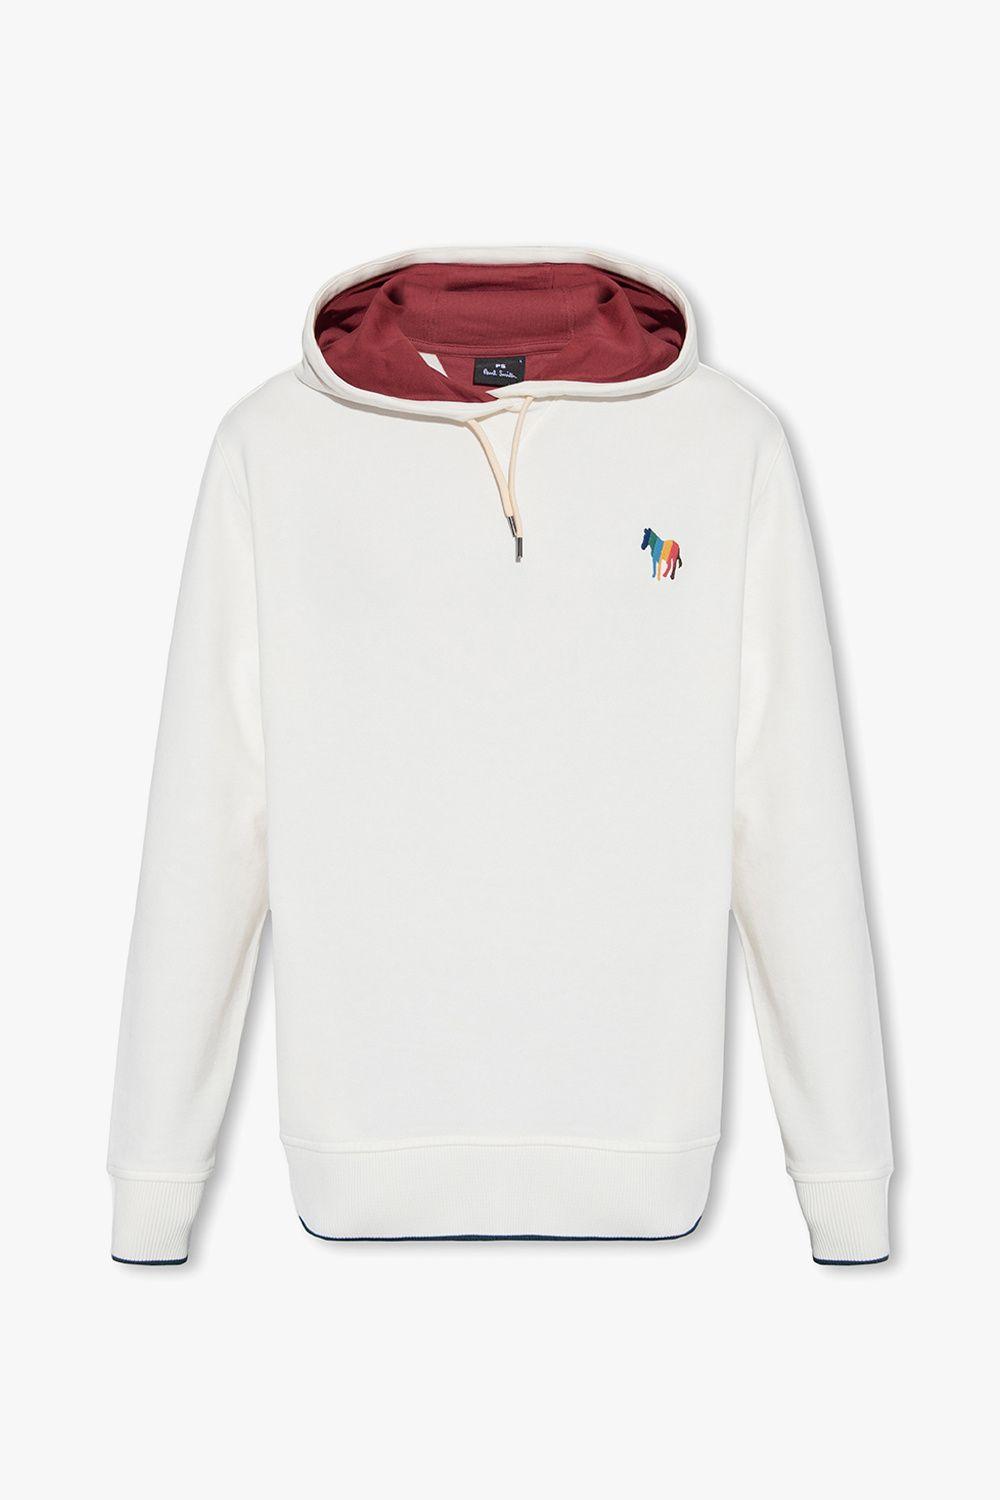 PS by Paul Smith Hoodie With Zebra Motif in White for Men | Lyst